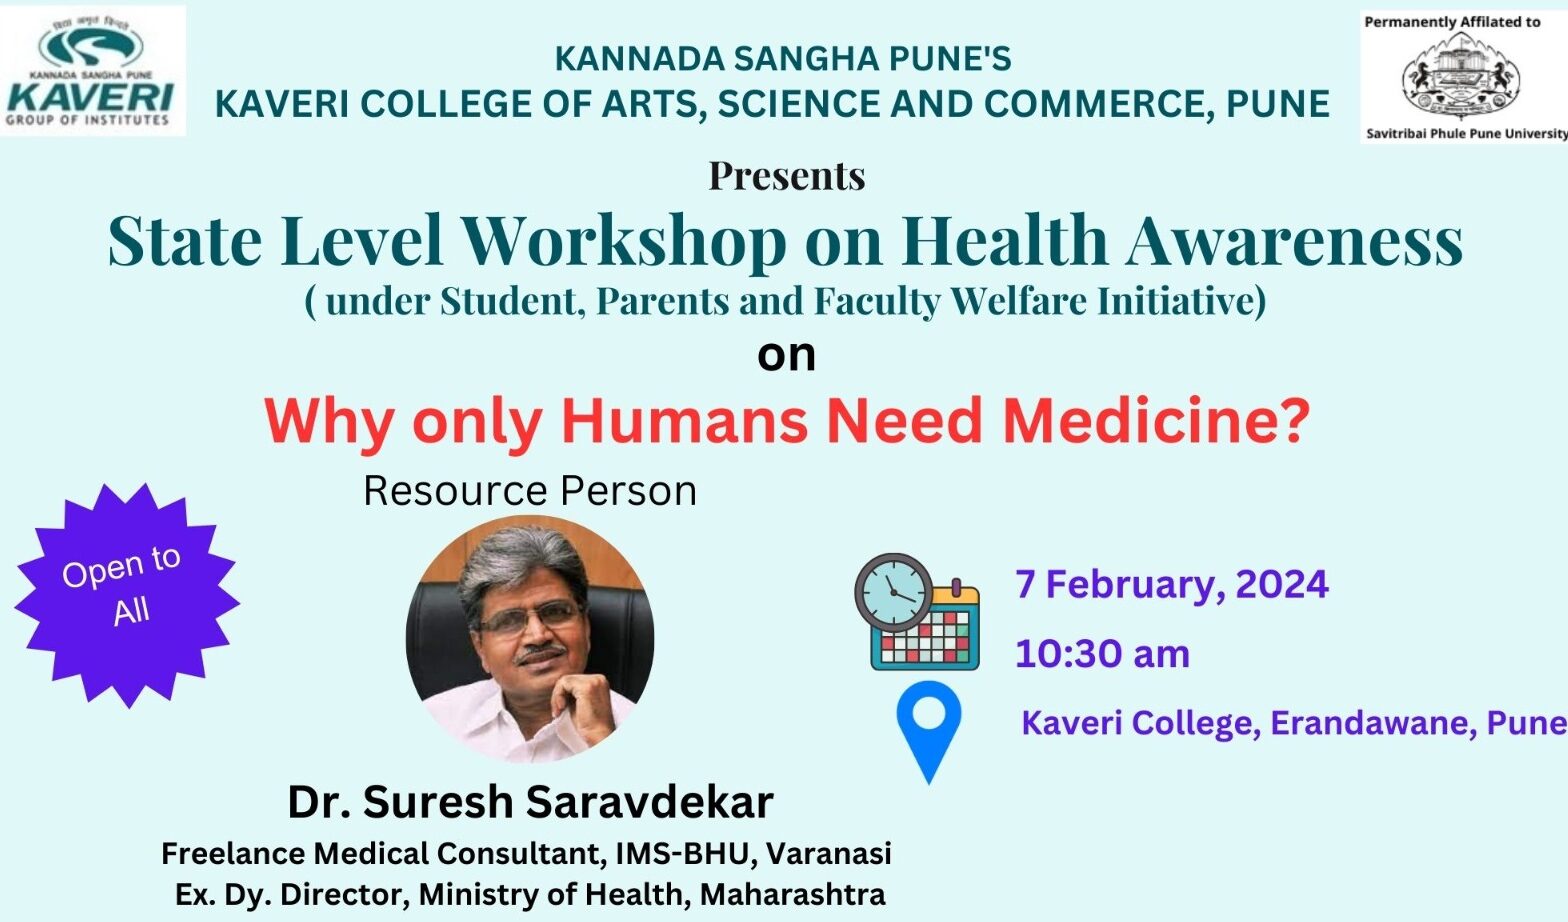 State Level Workshop on Health Awareness on ‘Why Only Humans Need Medicine?’